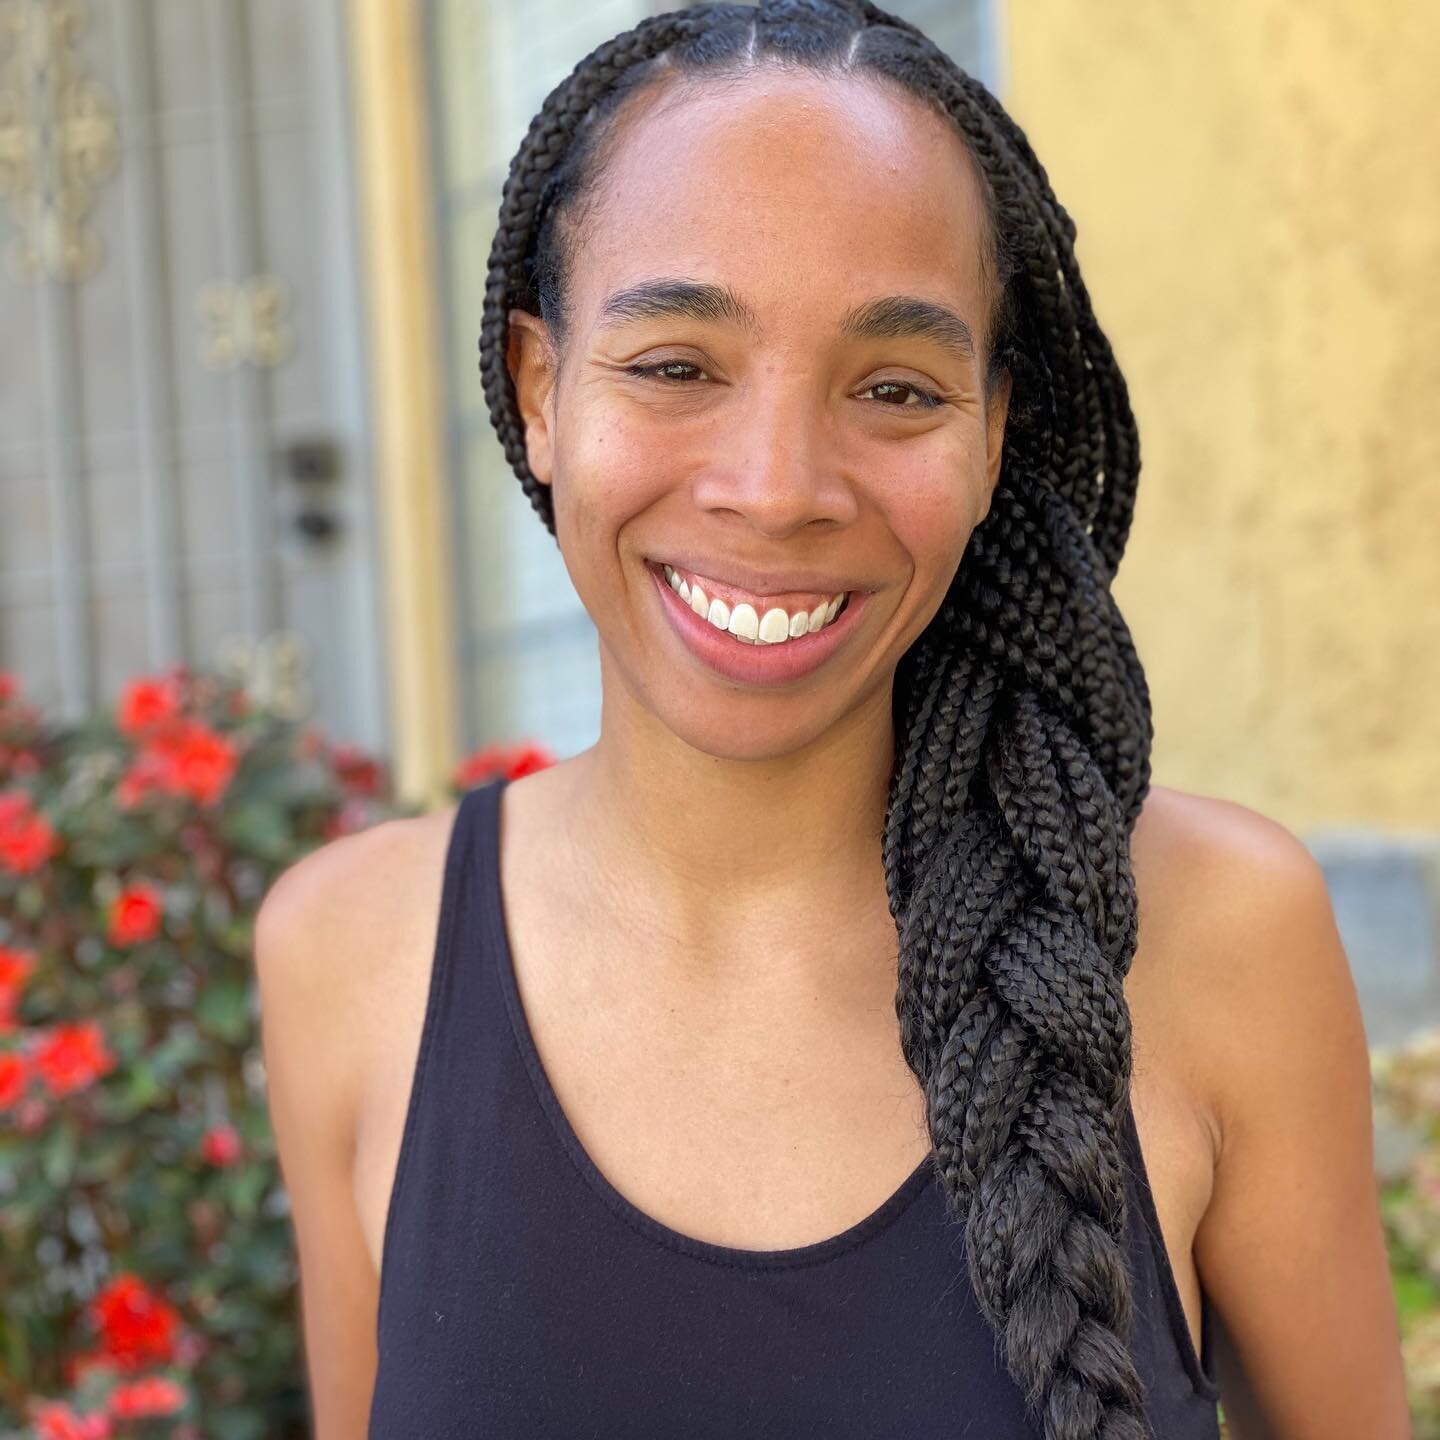 We&rsquo;re super excited to introduce @teachermomchronicles as this week&rsquo;s Climate Action LAb #Hero! 🦸&zwj;♀️🌎❤️

Brittany Jefferson is an advocate for sustainable living and environmental justice, committed to inspiring others to make more 